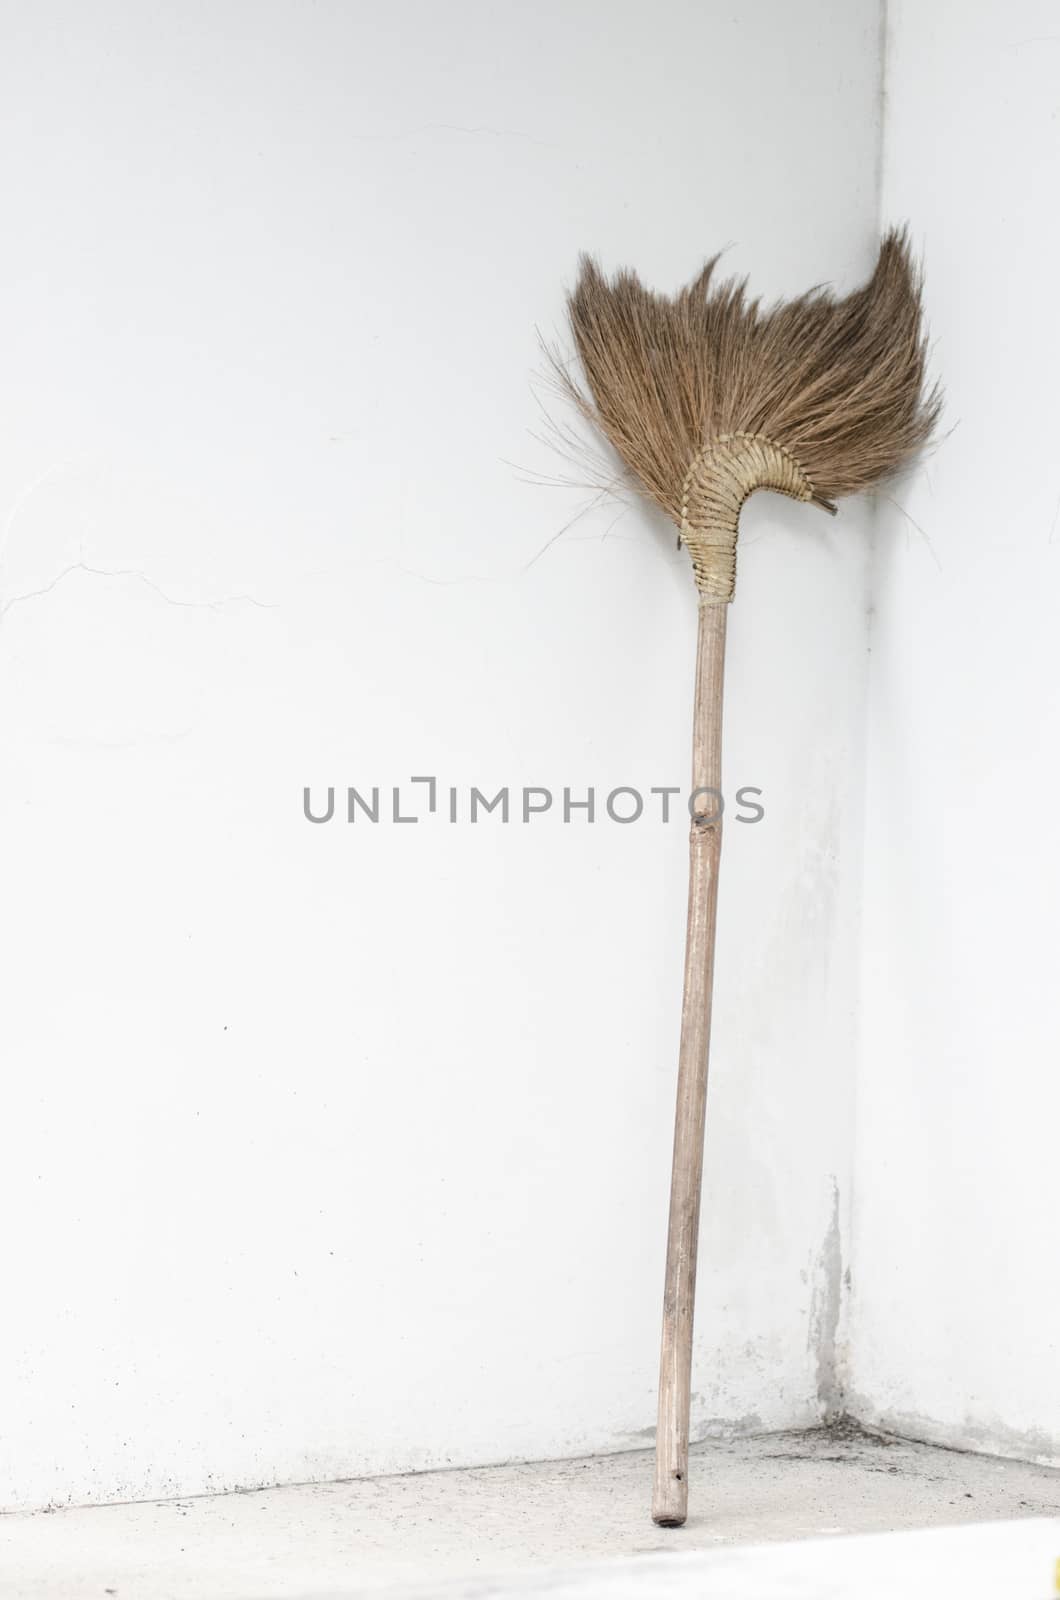 Broom beside wall, Rest concept